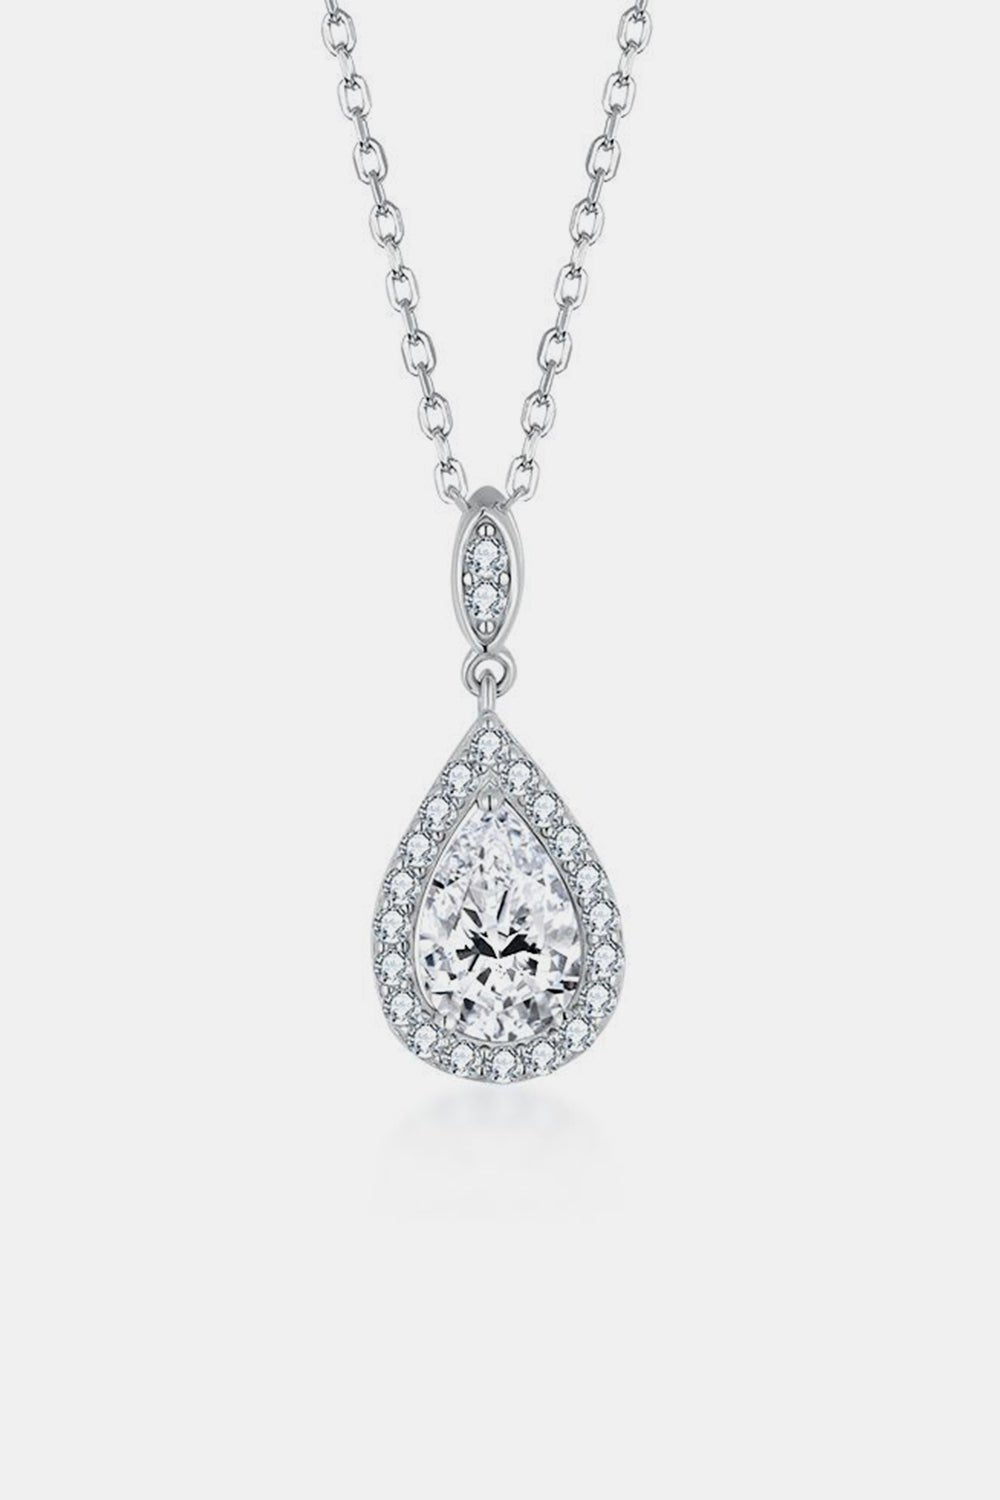 1.5 Carat Moissanite 925 Sterling Silver Teardrop Necklace - Analia's Boutiques -